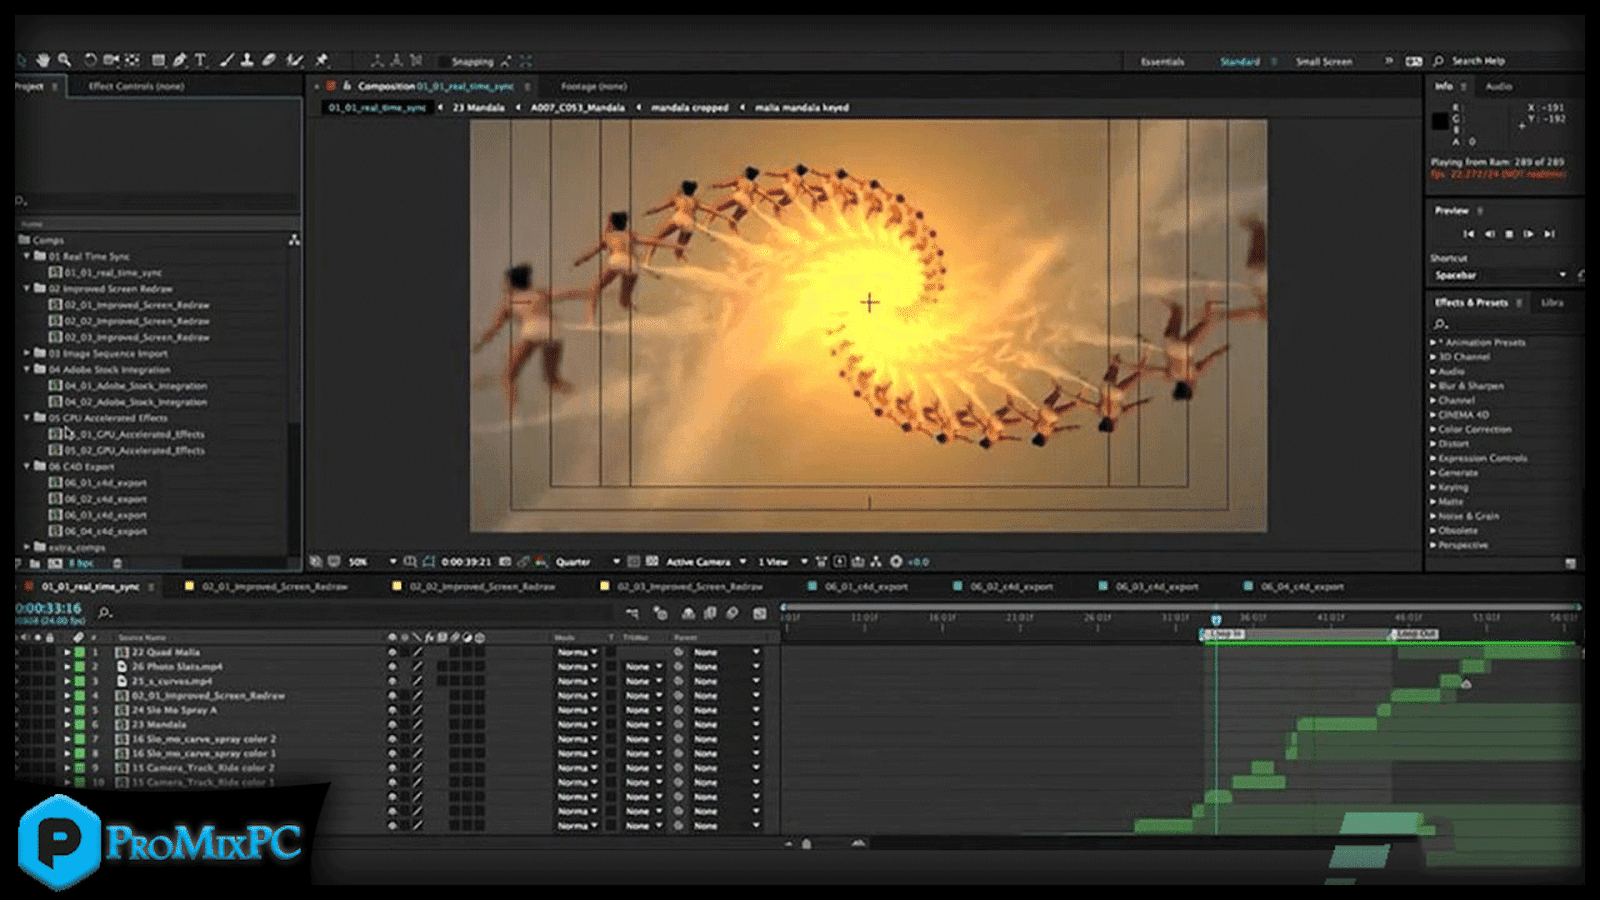 Adobe effects 2022. After Effects Интерфейс 2022. Интерфейс after Effects 2020. AE cc 2020. Adobe after Effects.